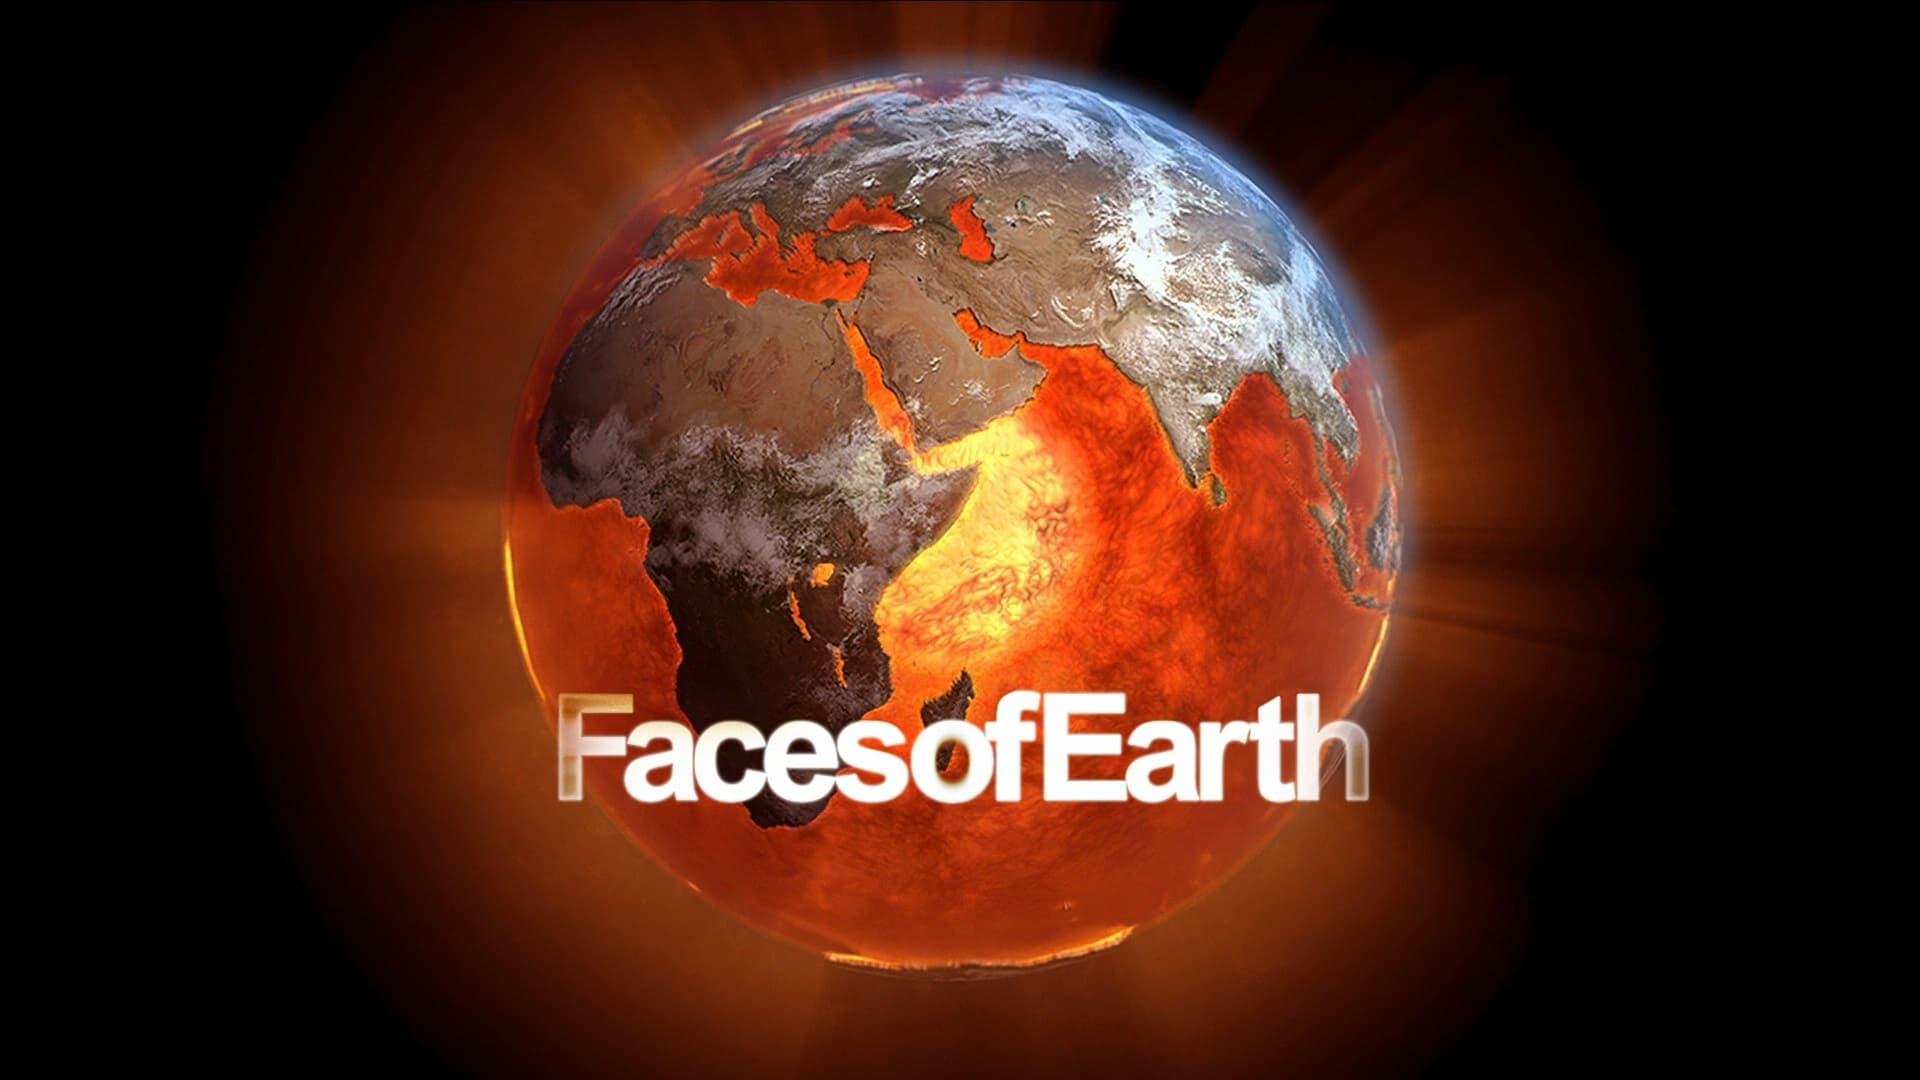 Faces of Earth backdrop